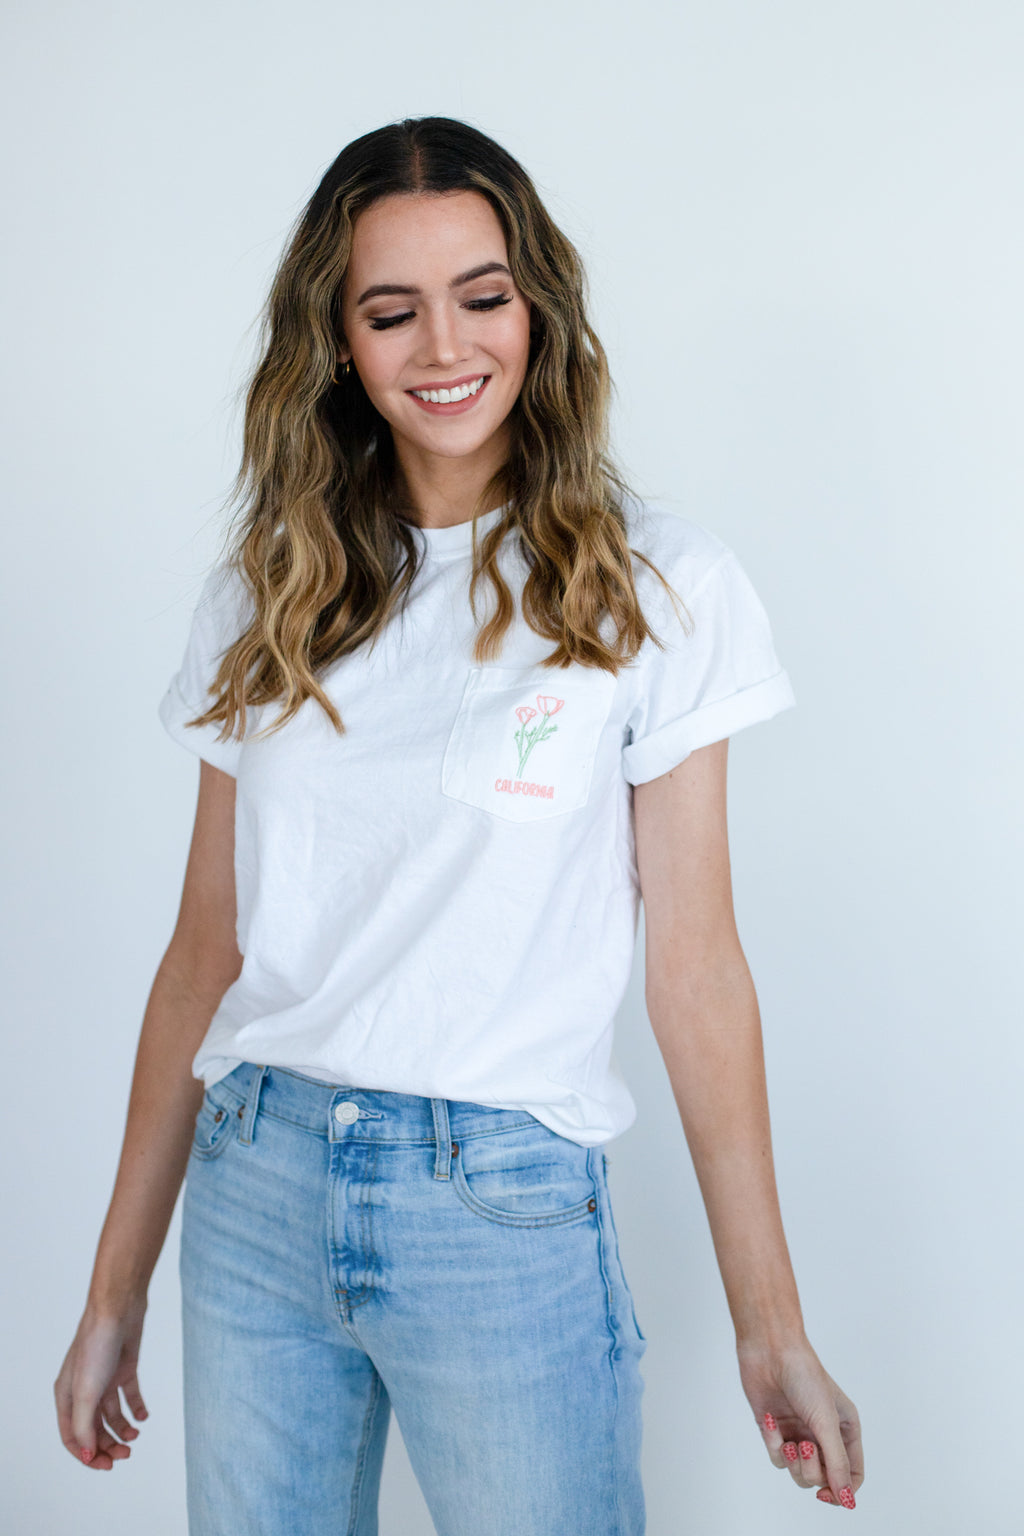 California Embroidered Pocket Tee - White - Shop Back Home